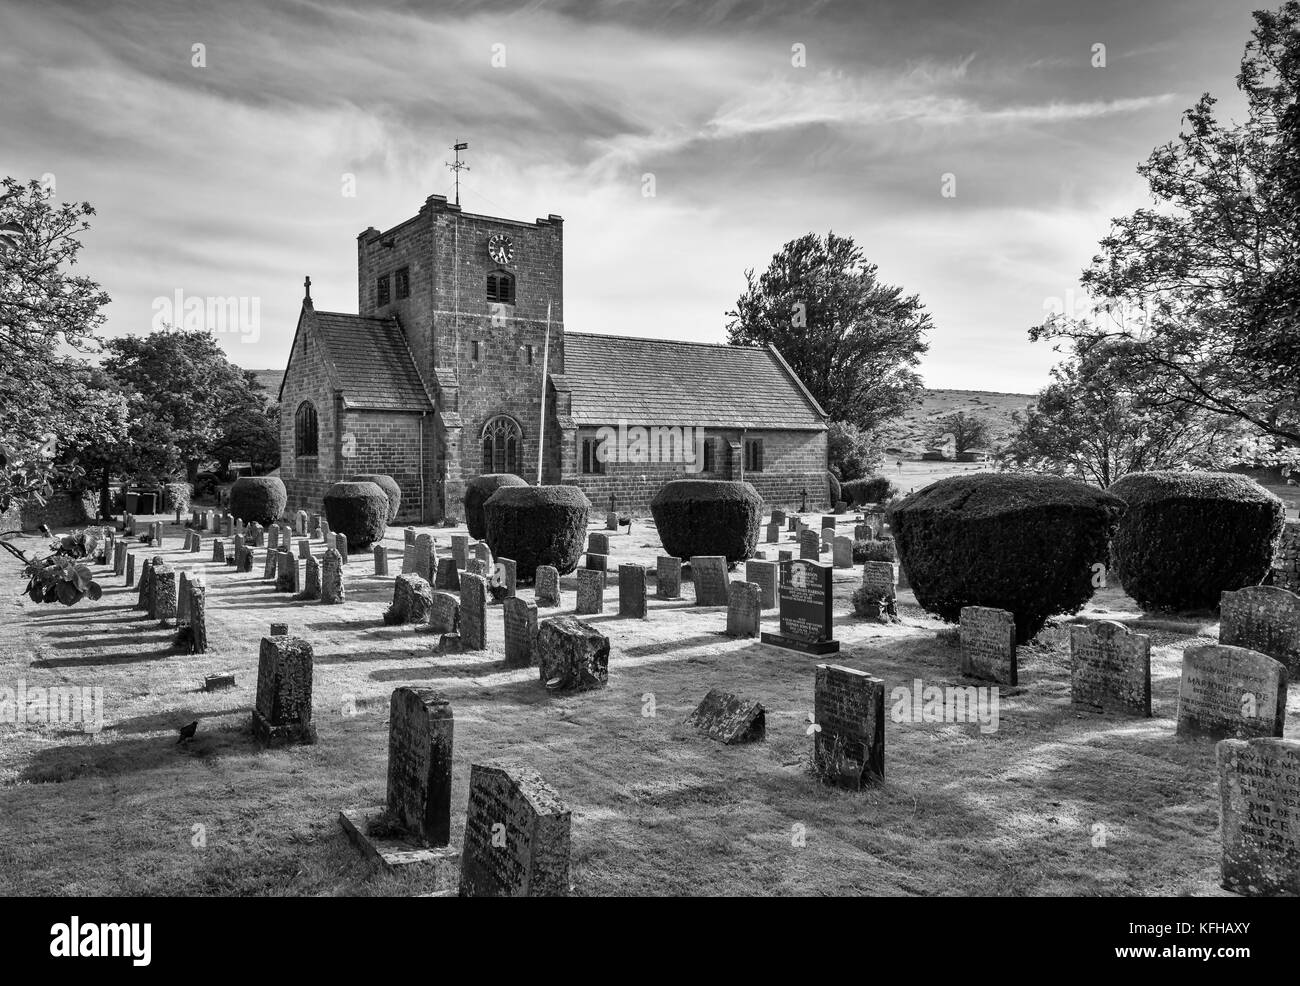 St Mary's Church,Goathland, showing the church and part of the graveyard Stock Photo